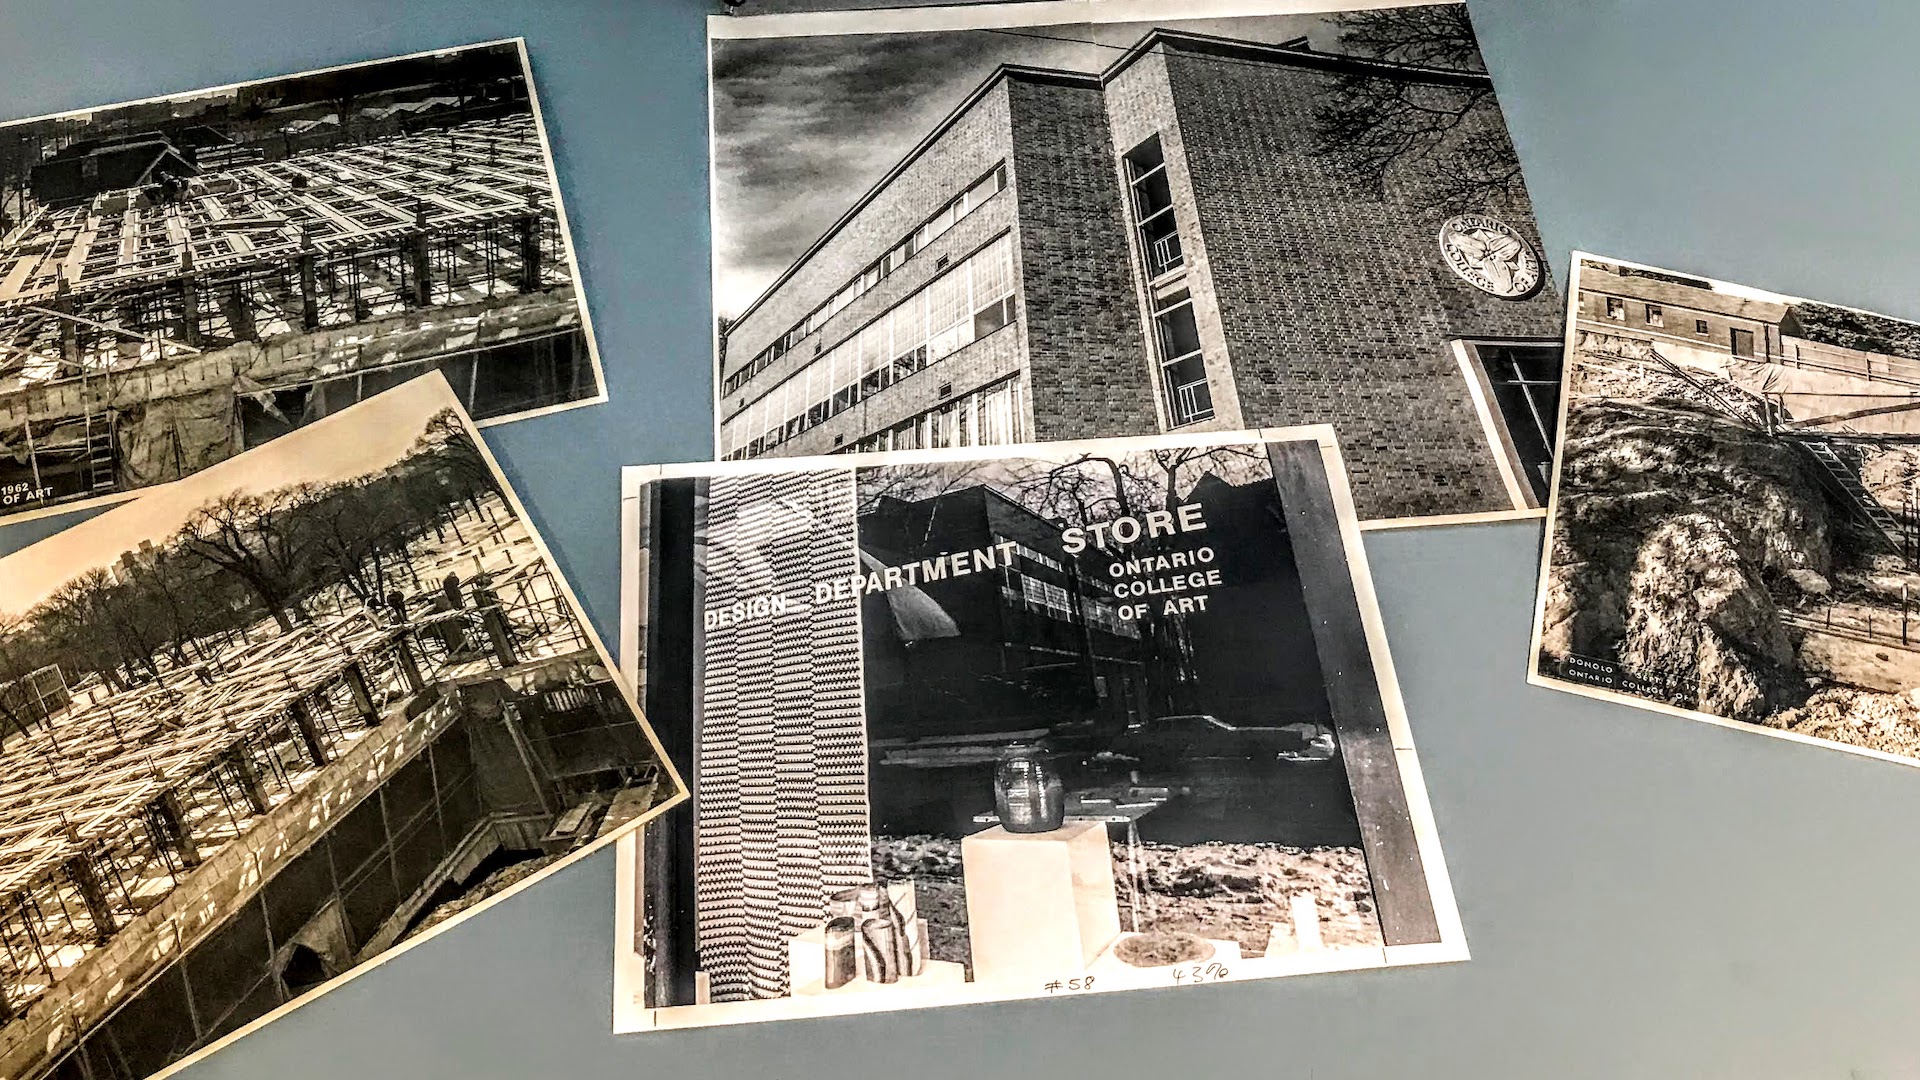 Image consists of archival photographs laid out on a table. The photographs show Ontario College of art buildings, the construction of a new wing at 100 McCaul Street and the Design Department Store for the Ontario College of Art in the 1960’s.